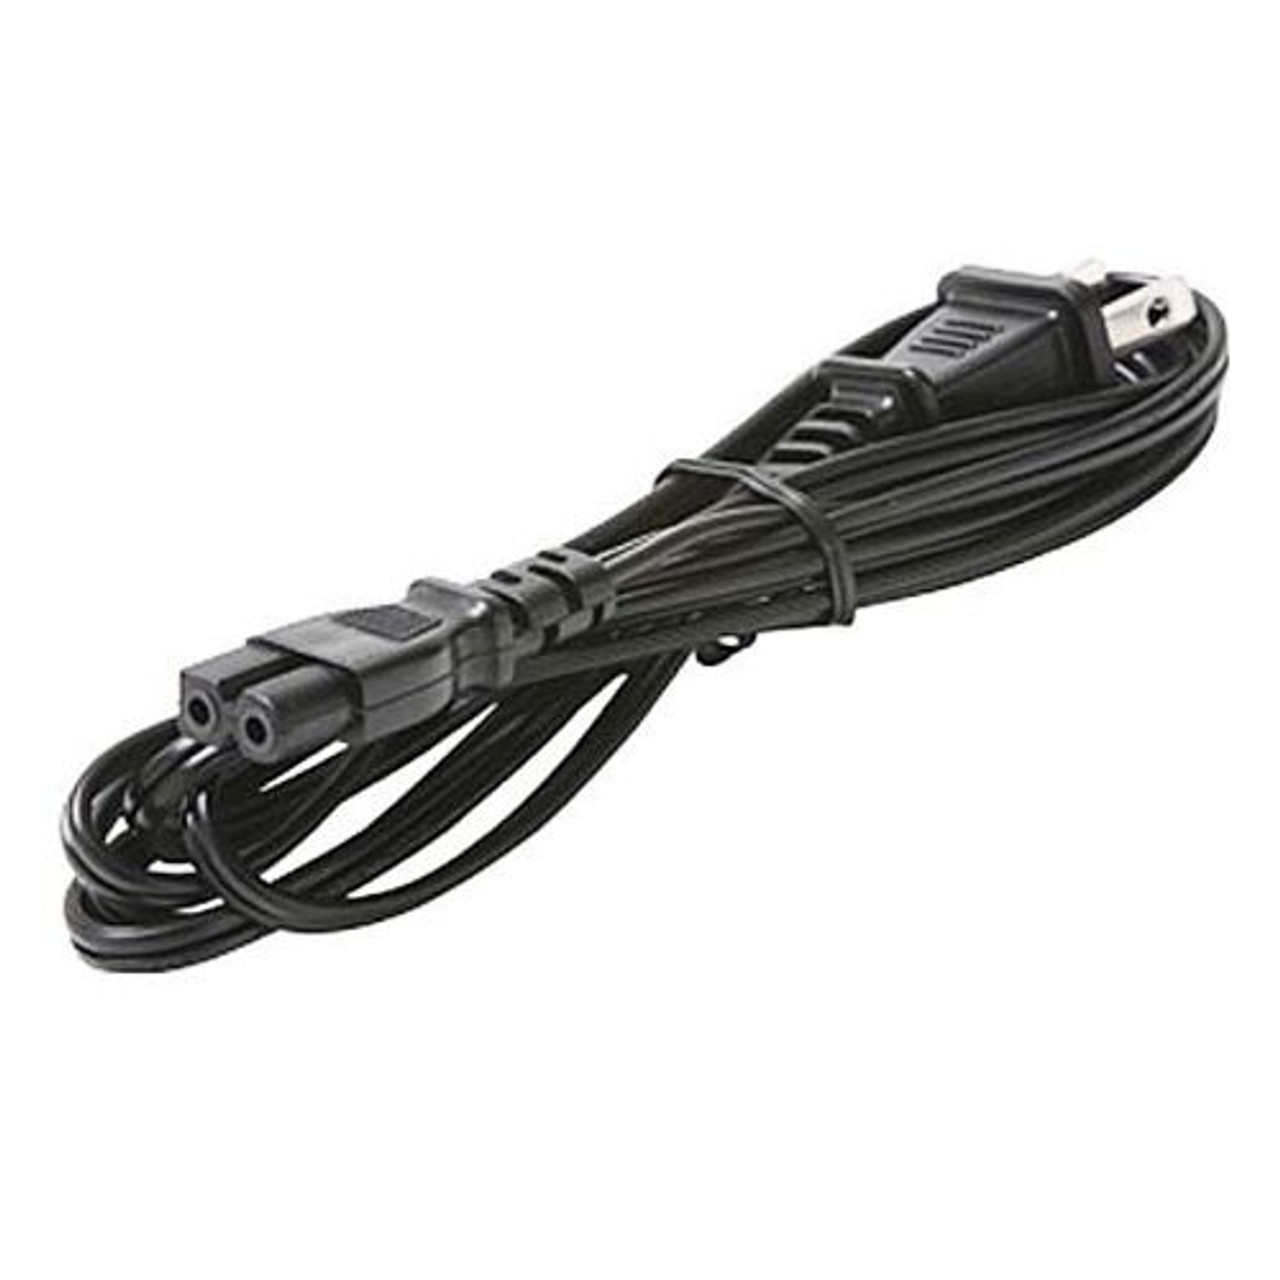 Steren 505-396 6' FT 2 Conductor Polarized Dual Insulated AC Power Cord Cable UL Listed Replacement 120 VAC 2 Conductor Black Electronic Equipment Stereo Radio Replacement Power Cord, UL Listed, Part # 505396